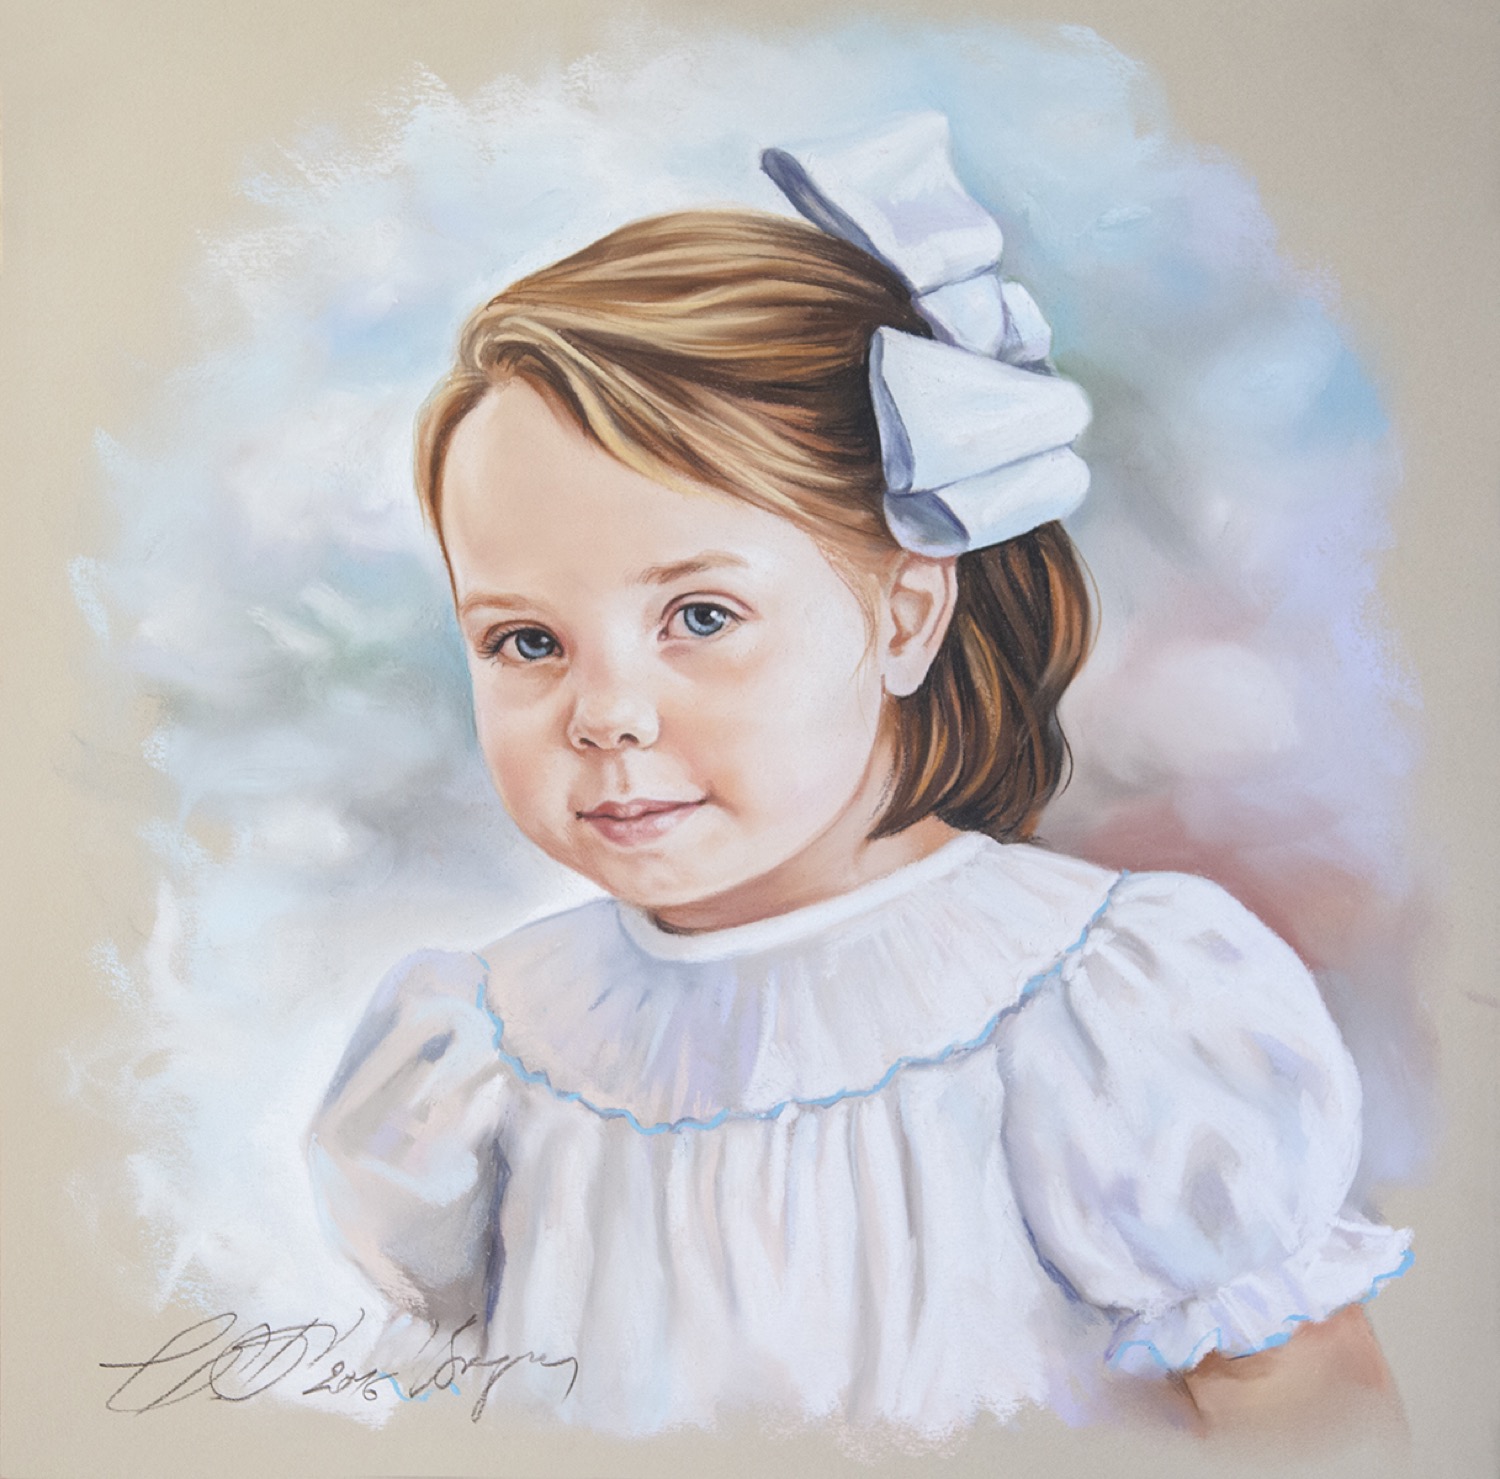 New Pastel portrait painting process on my  channel, working with  MAMUT handmade soft pastels - Pastel Portraits